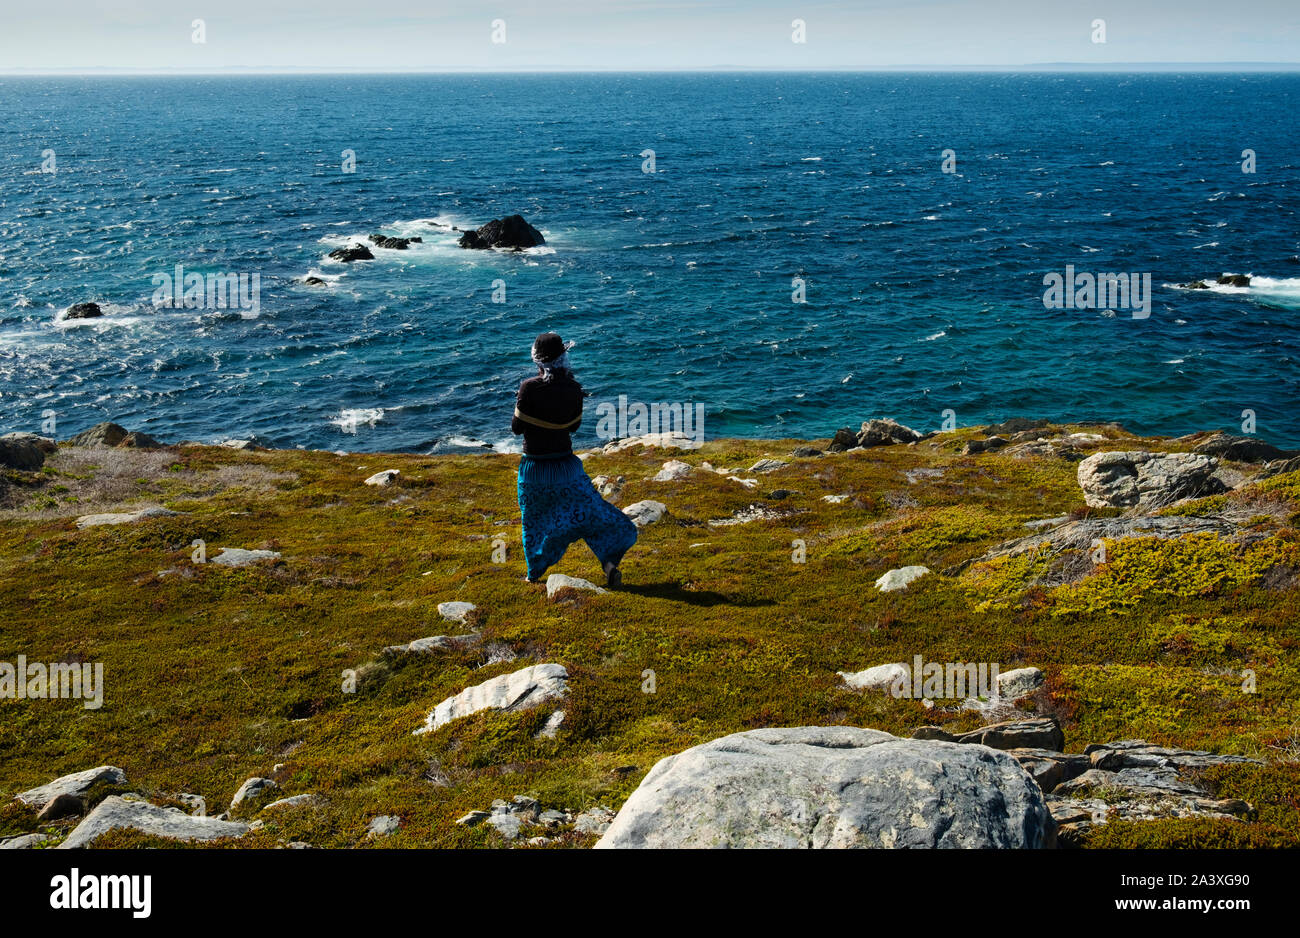 One woman looks out to sea from a cliff in Grates Cove, Newfoundland Stock Photo